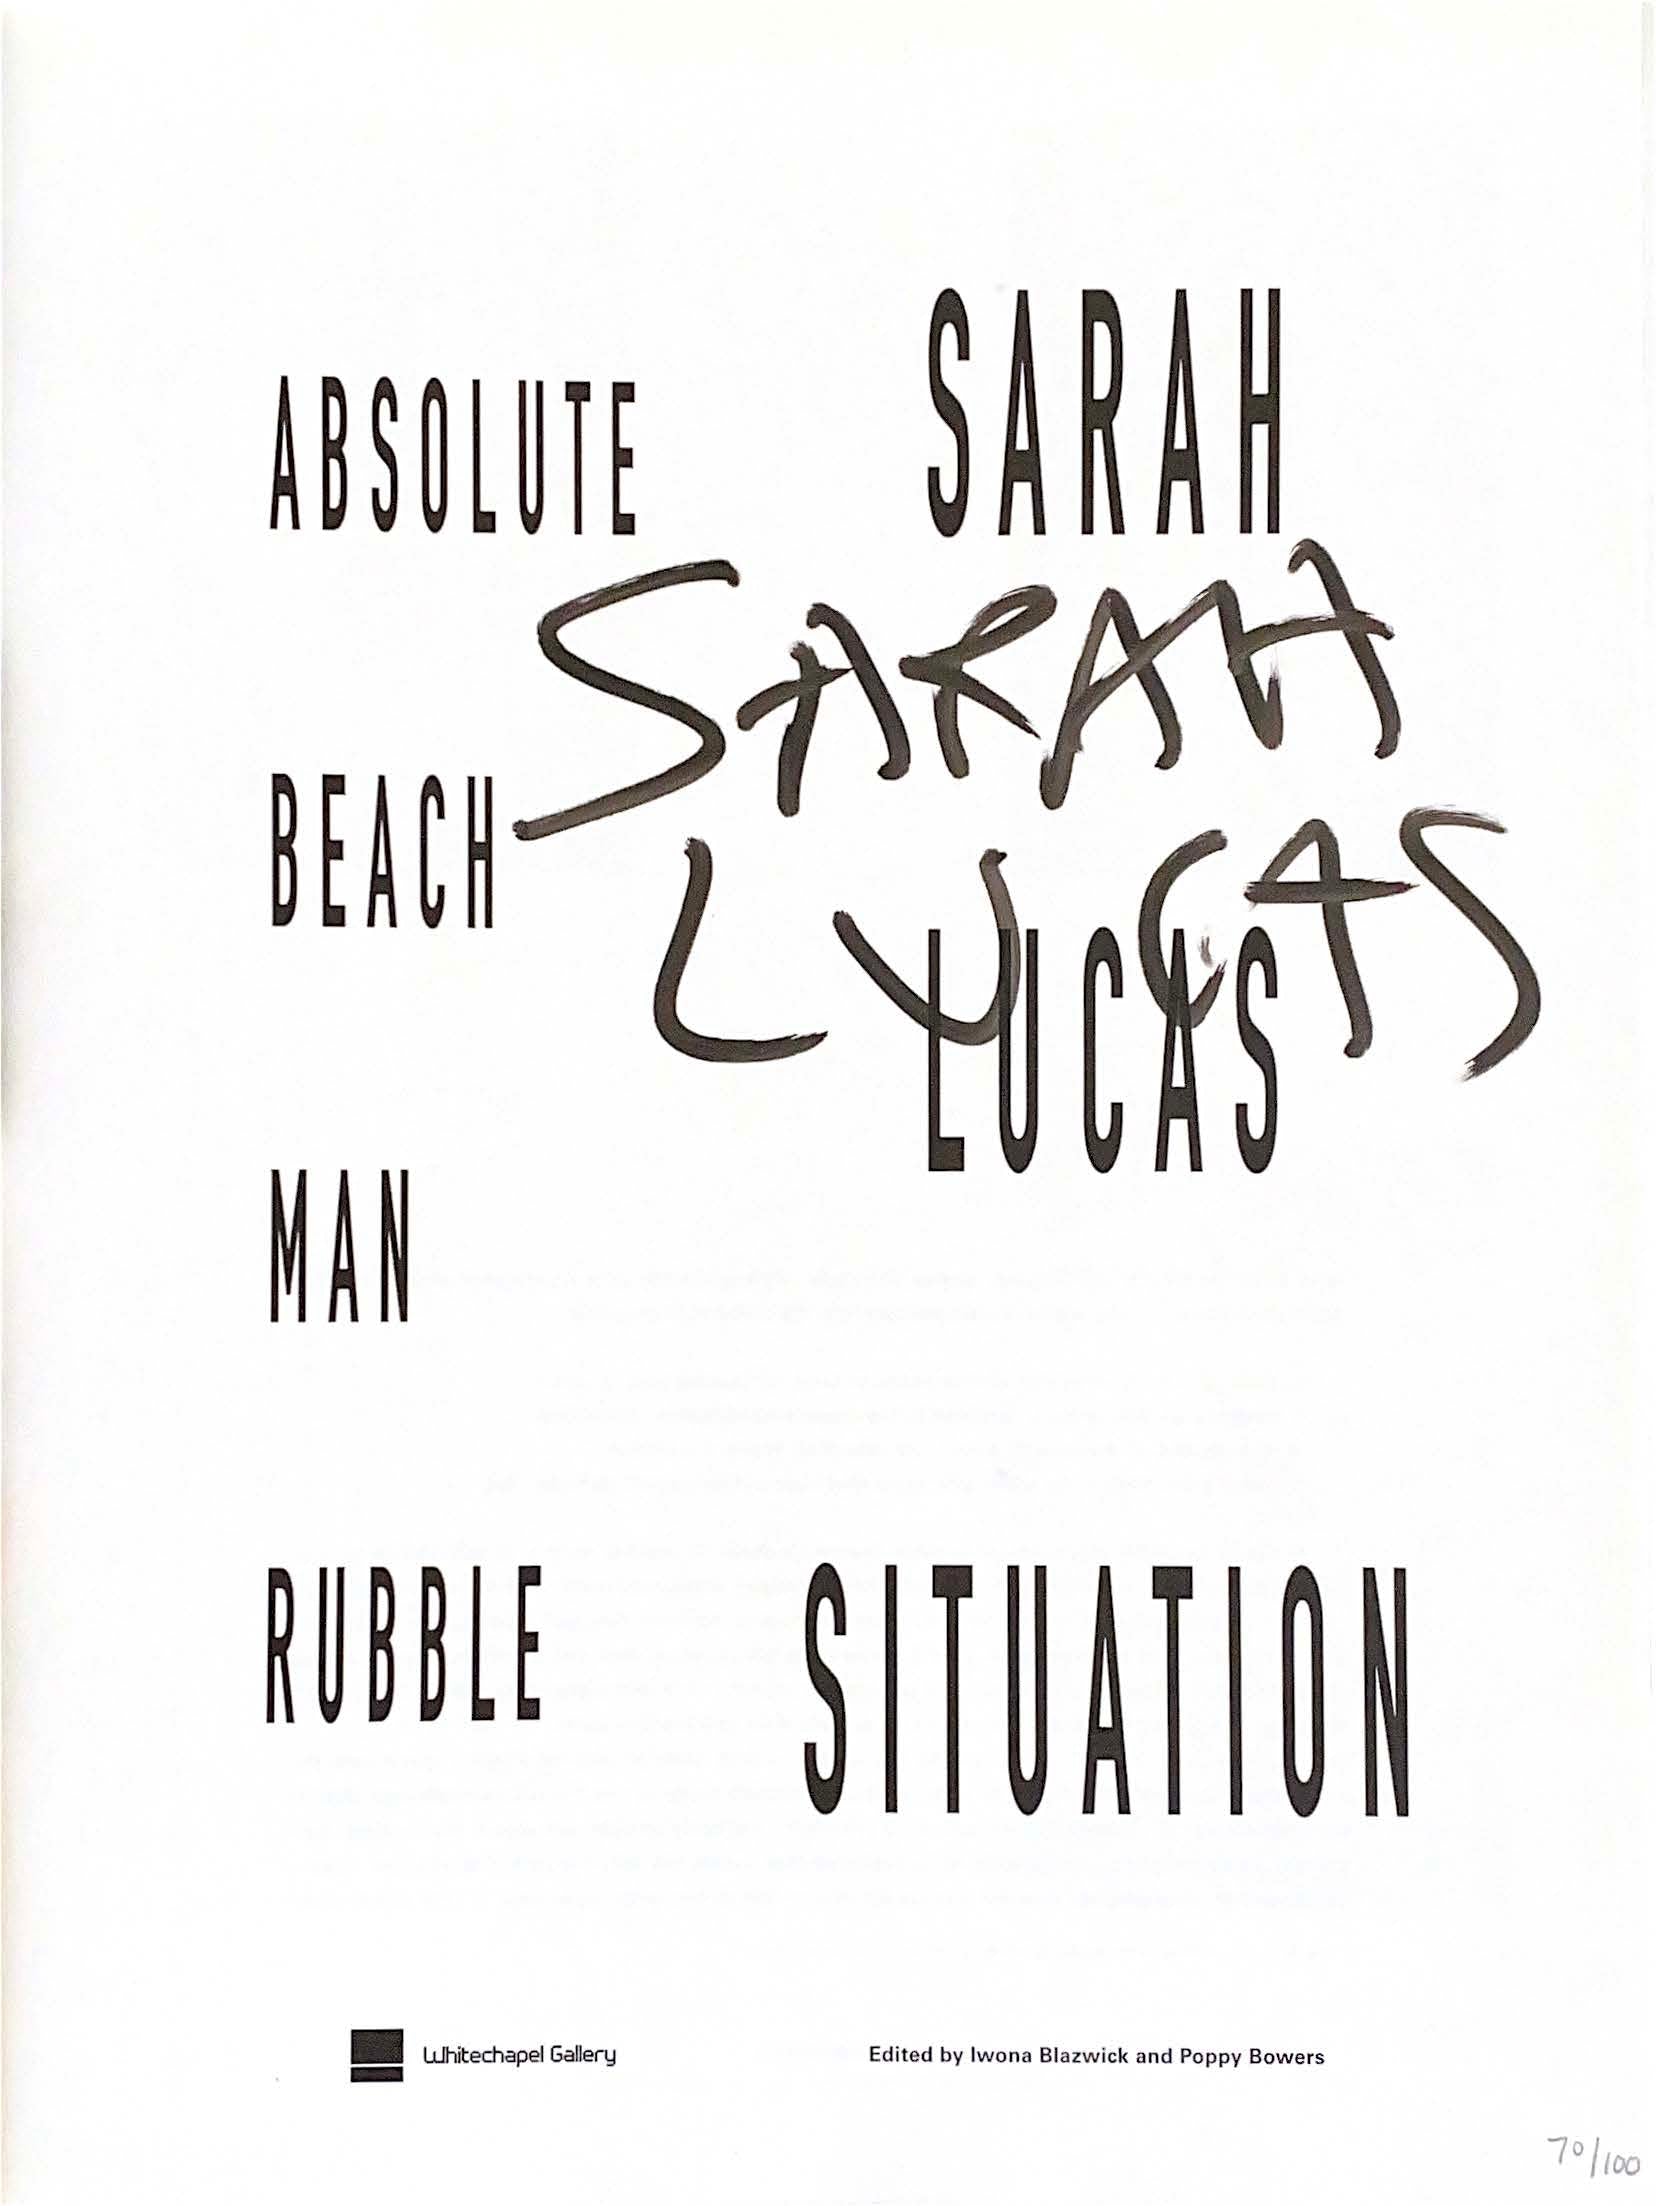 Situation: Absolute Beach Man Rubble
Signed copy. N° 70/100